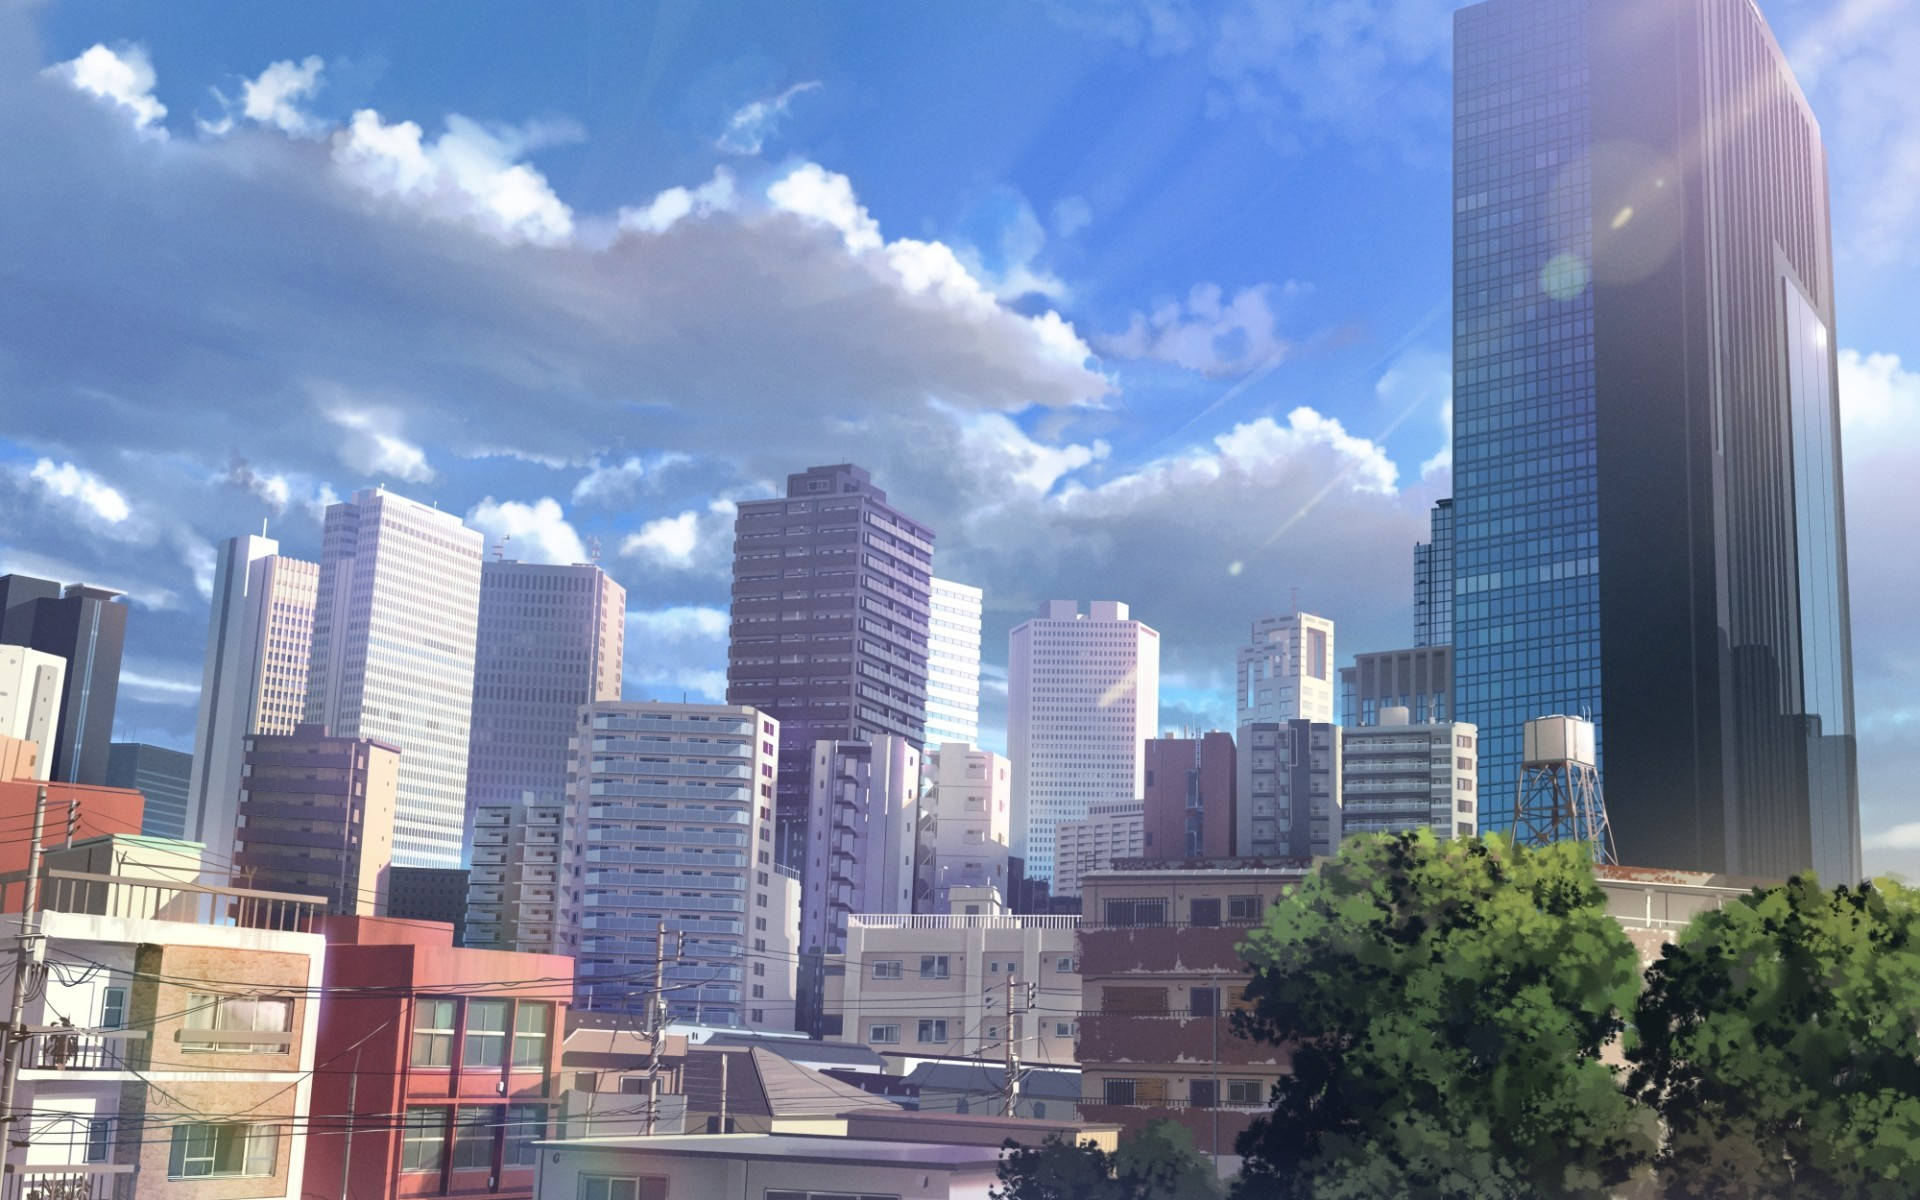 Buildings And Cloudy Sky Anime City Background Wallpaper